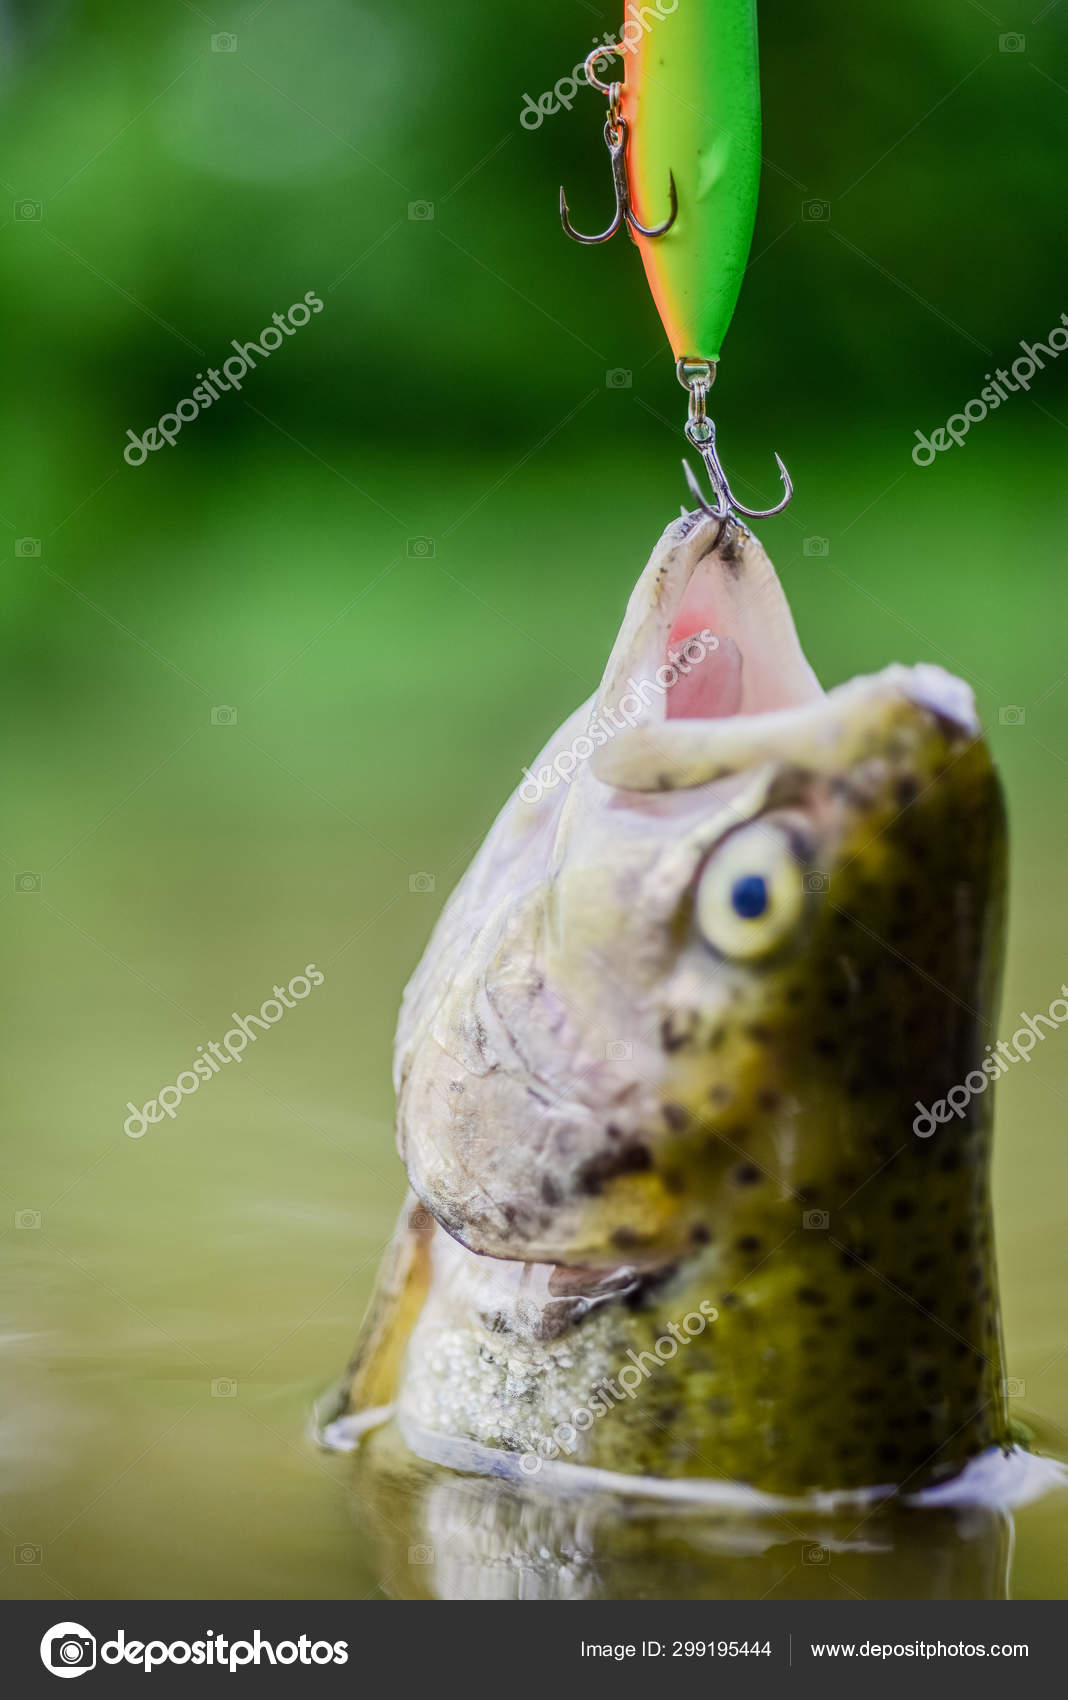 Fish trout caught in freshwater. Fish open mouth hang on hook. fishing  equipment. Bait spoon line